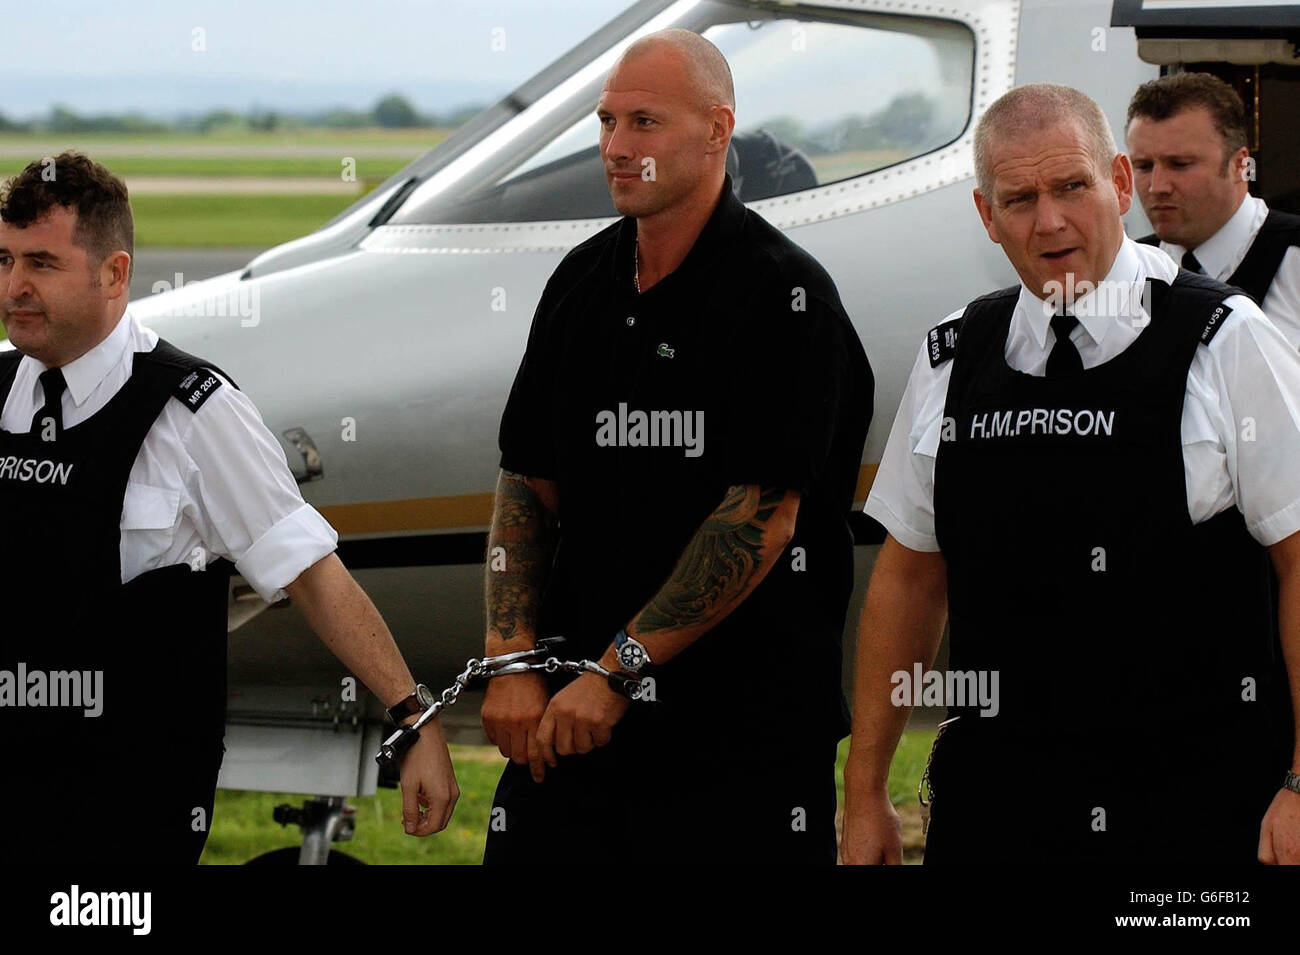 John Barber is handcuffed to prison warders as he is brought from an aircraft at Manchester Airport,following his extradition after being captured by police in the picturesque village of Sant Pol de Mar, north of Barcelona, Spain, in August last year. Barber, 36, jumped bail halfway through his crown court case in which he was accused of masterminding a major drugs cartel which dealt in heroin and crack cocaine worth millions of pounds. He was convicted in his absence at Liverpool Crown Court in January 2002 and sentenced to 22 years for conspiracy to supply Class A drugs. Stock Photo